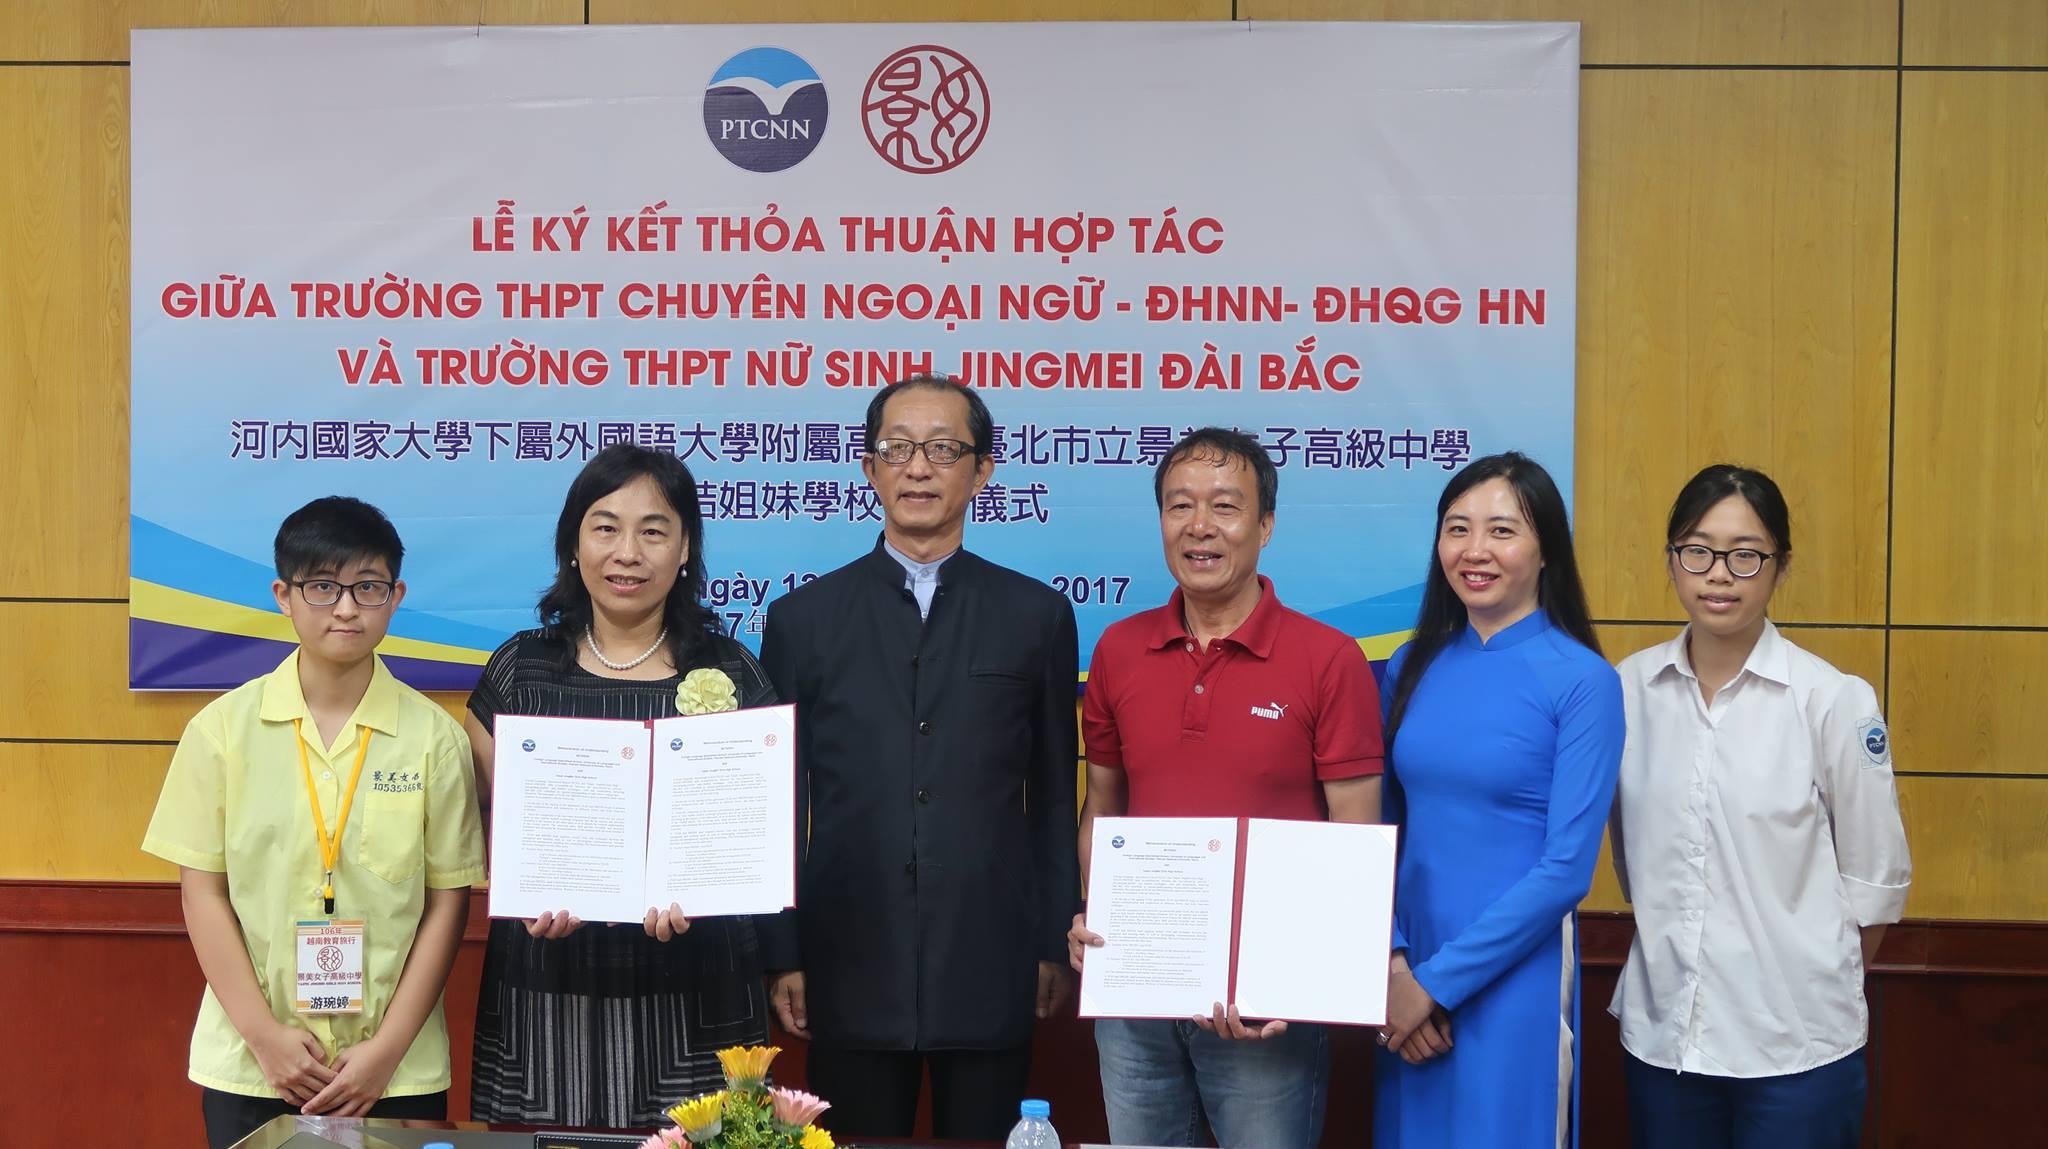  (left 2:  Huang,Yun-Jin, the president of Jing Mei Girls Senior High School, left 3: Lee Ming, director of education division of Taipei Economic and Cultural Office in Vietnam, right 3: Nguyễn Thành Văn, the president of FLSS, right 2: Lại Thị Phương Thảo,  the vice president of FLSS)